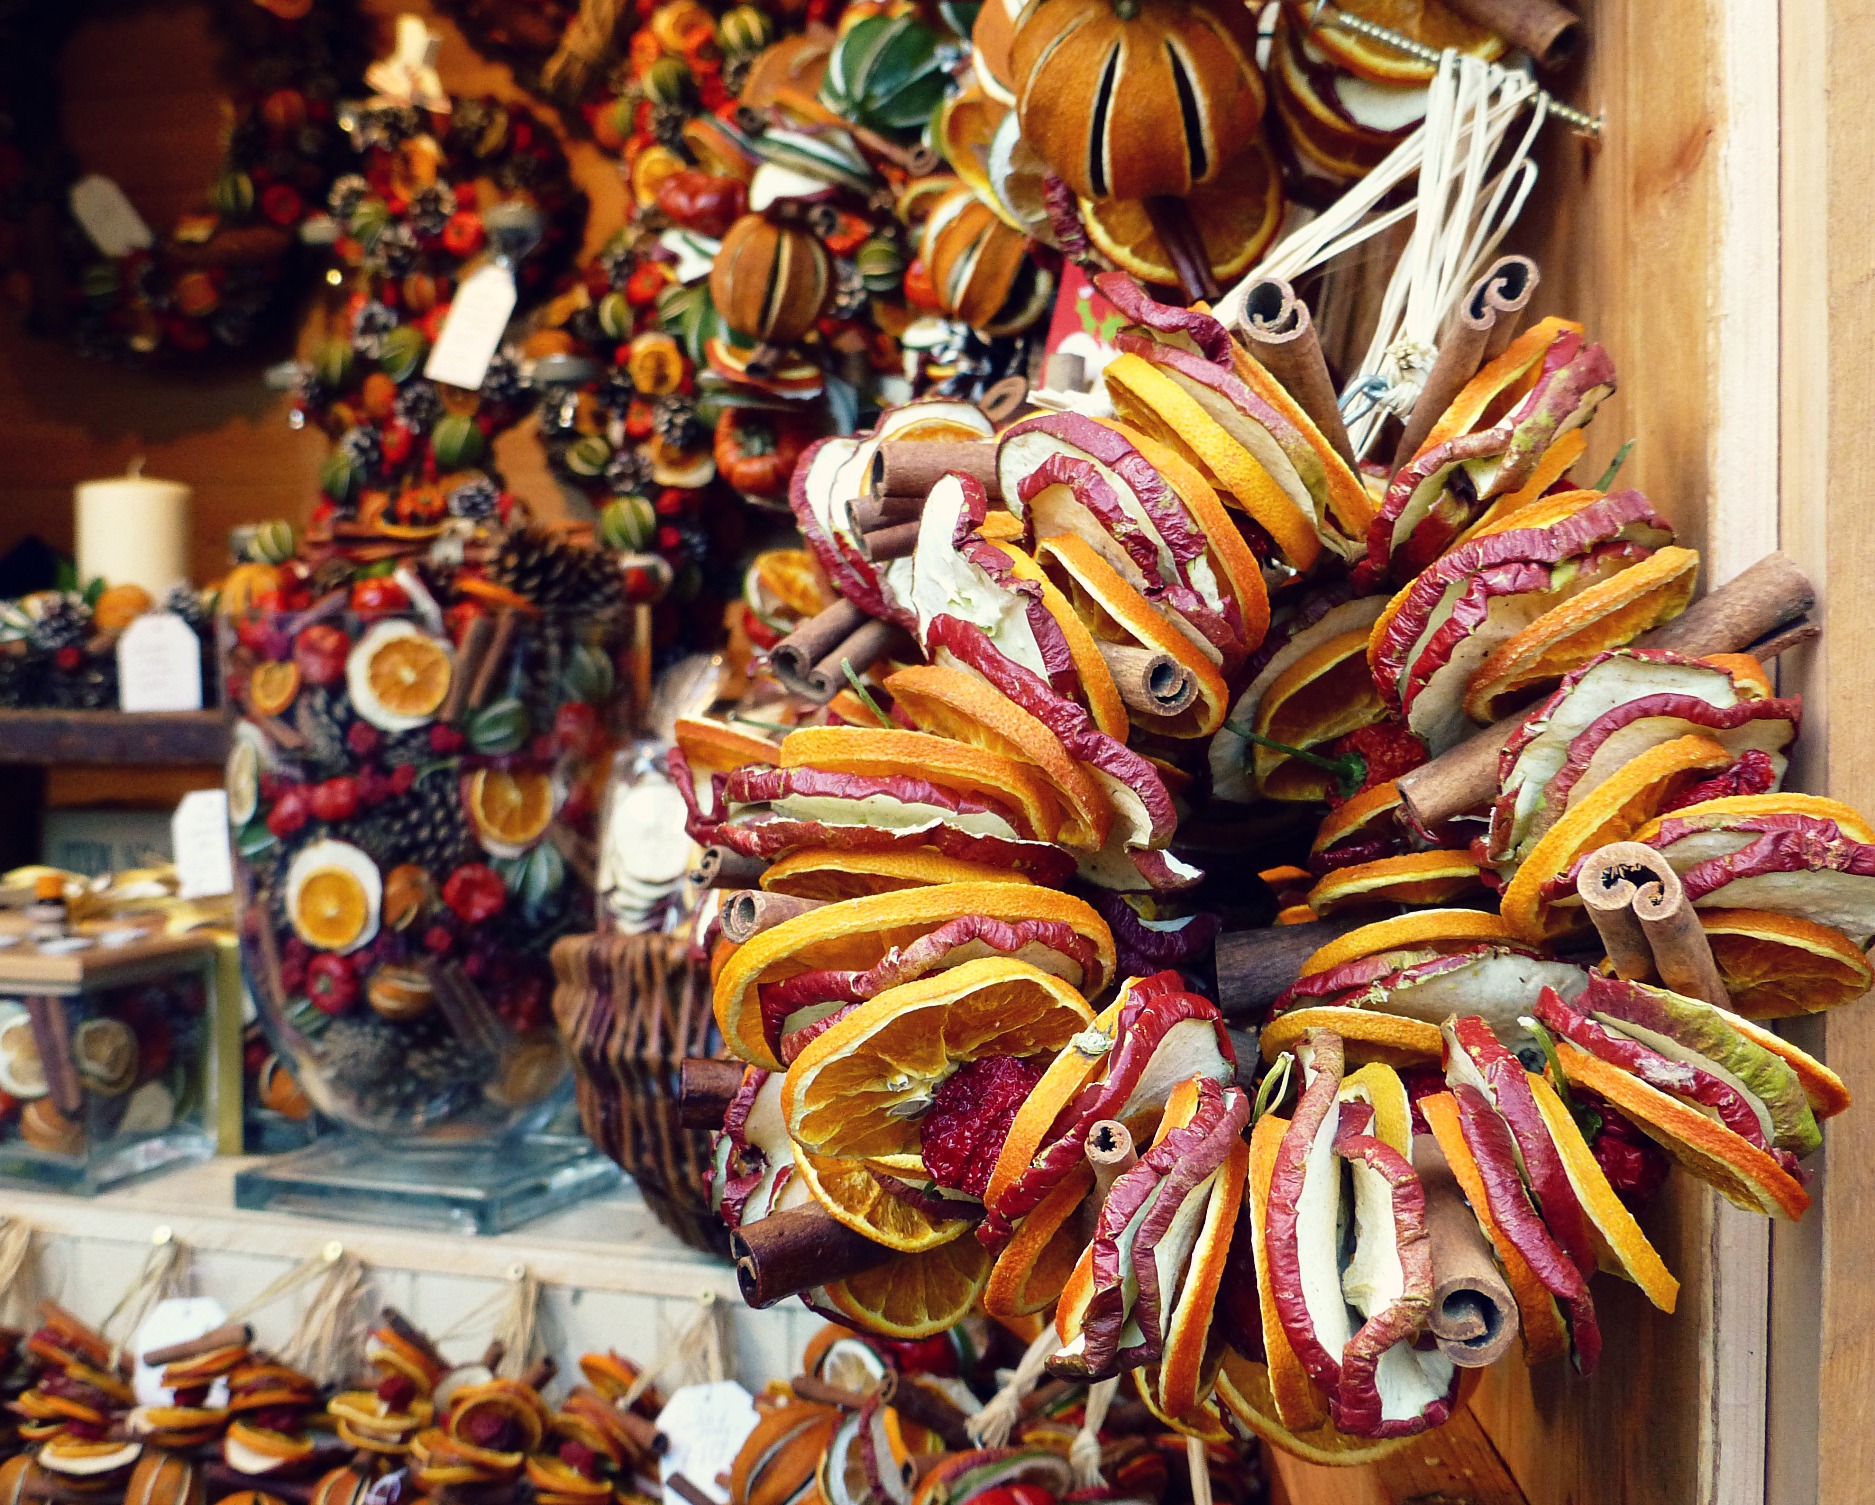 Delicious smelling wreaths for sale